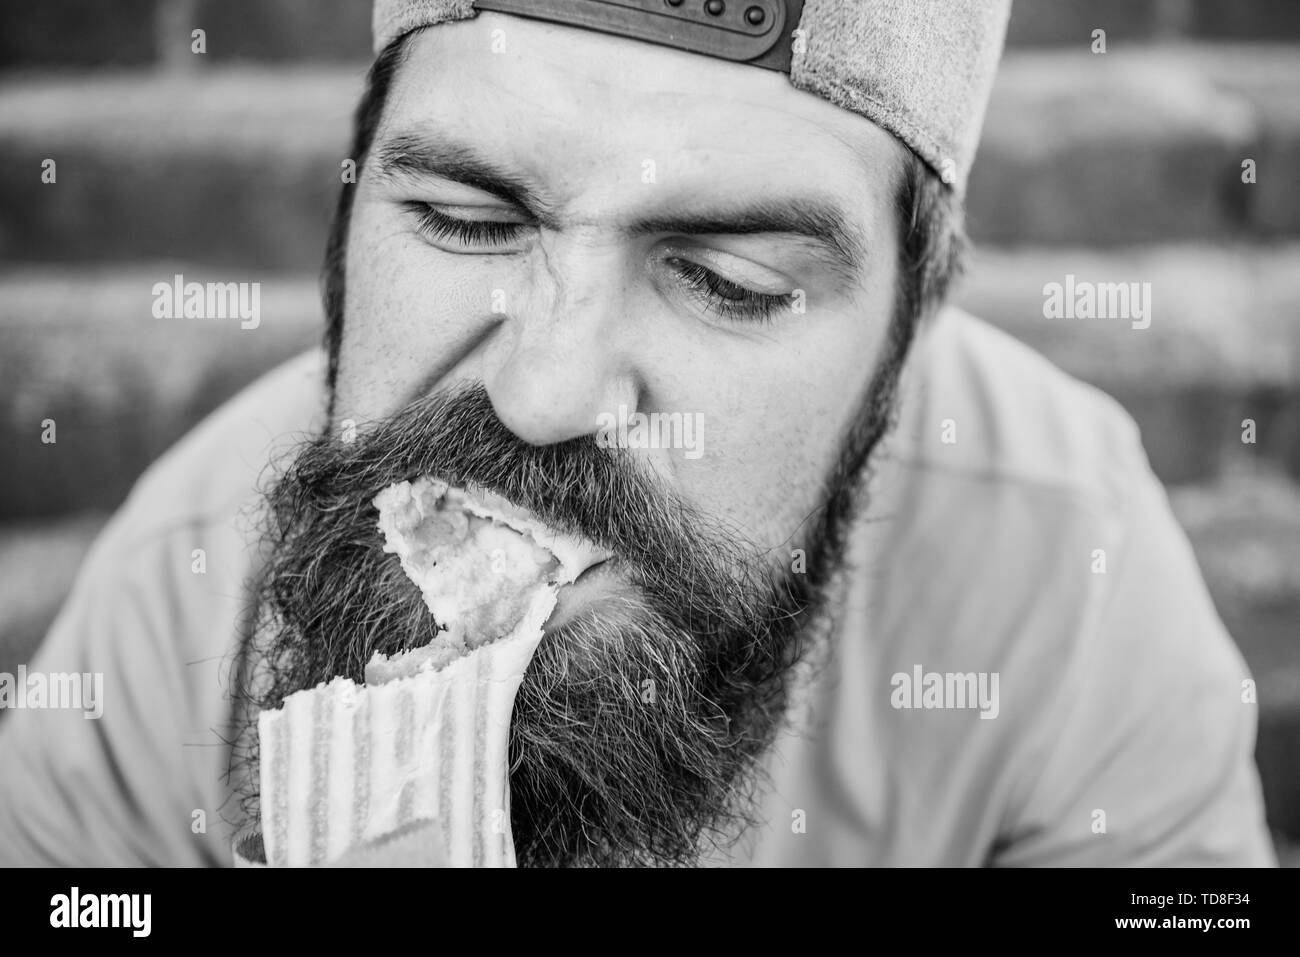 Unleashed appetite. Street food concept. Man bearded eat tasty sausage. Urban lifestyle nutrition. Carefree hipster eat junk food while sit stairs. Guy eating hot dog. Junk food. Snack for good mood. Stock Photo